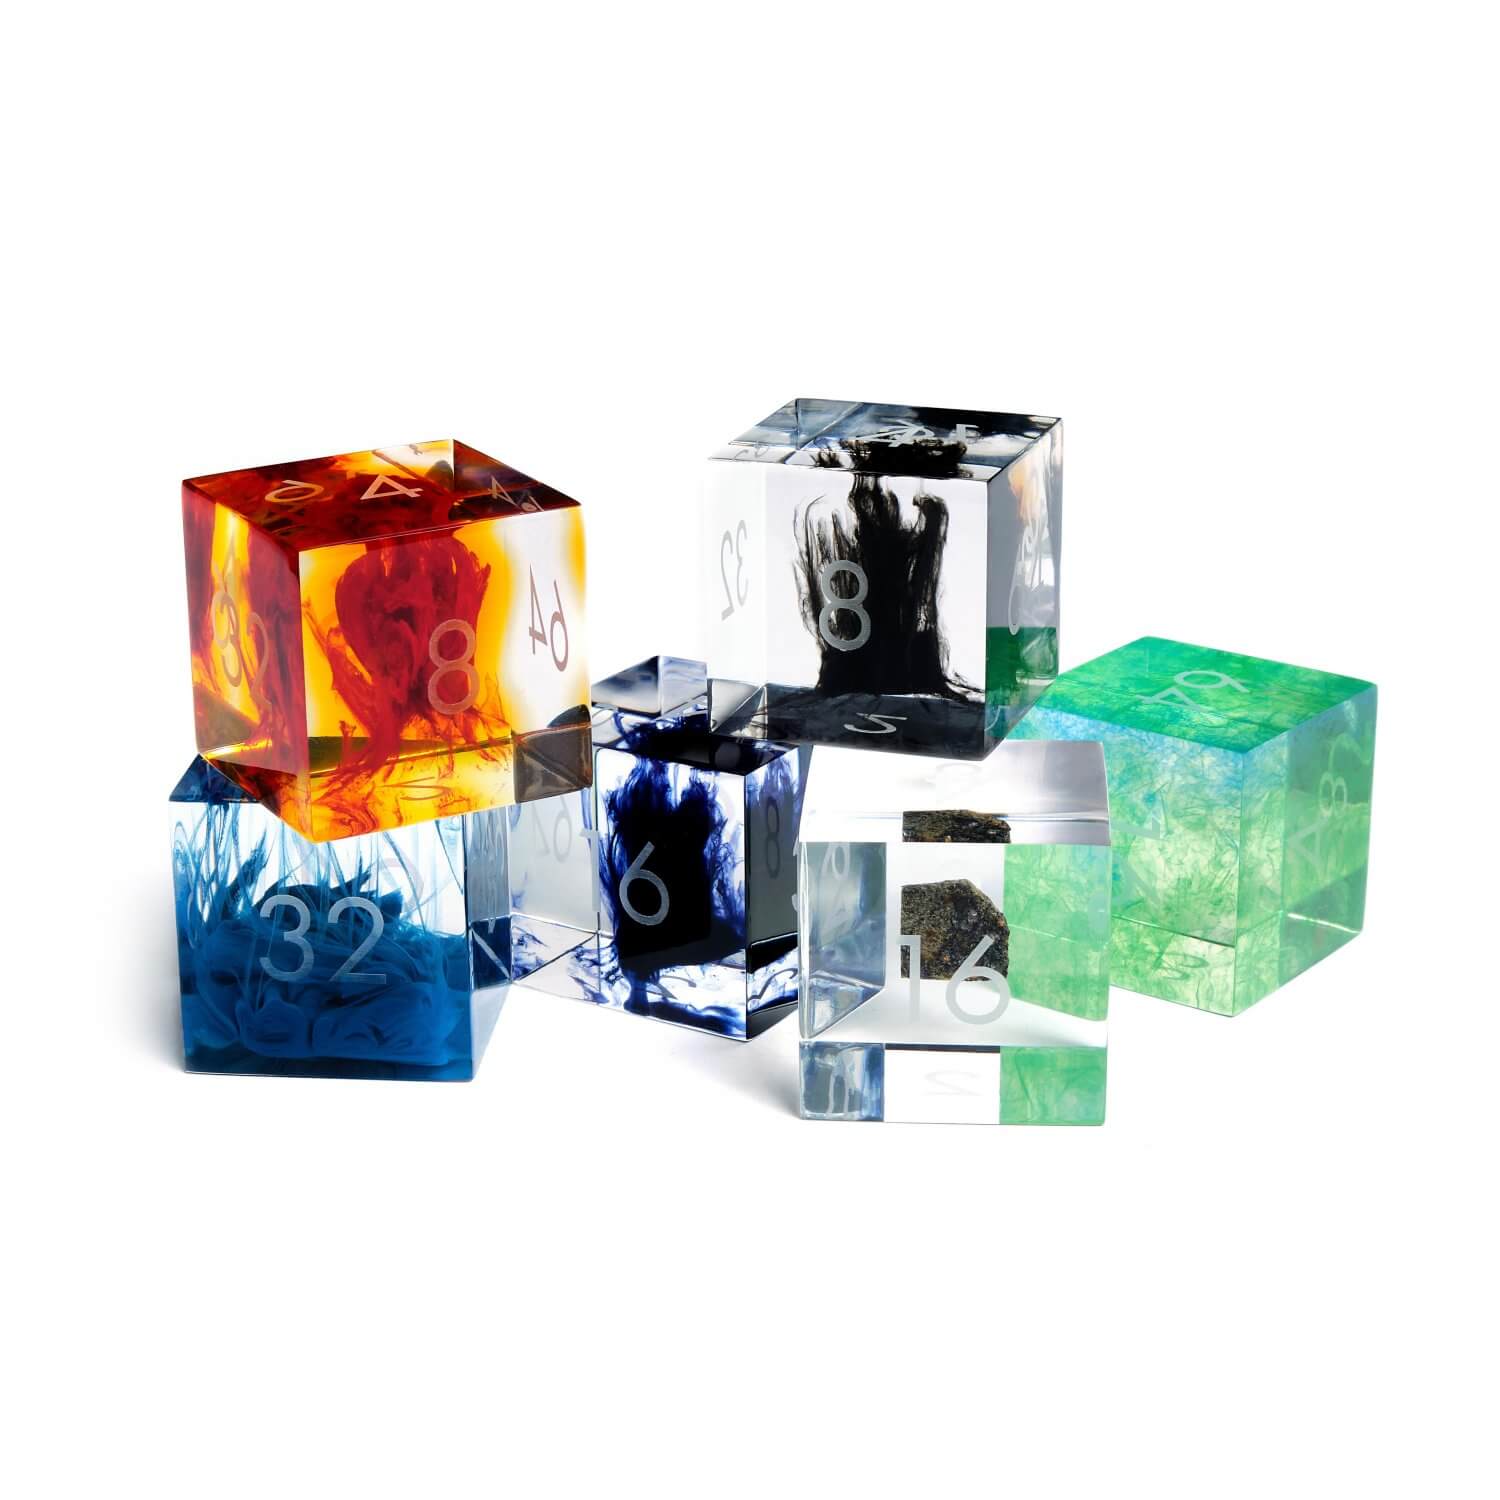 6 resin doubling cubes in different colours